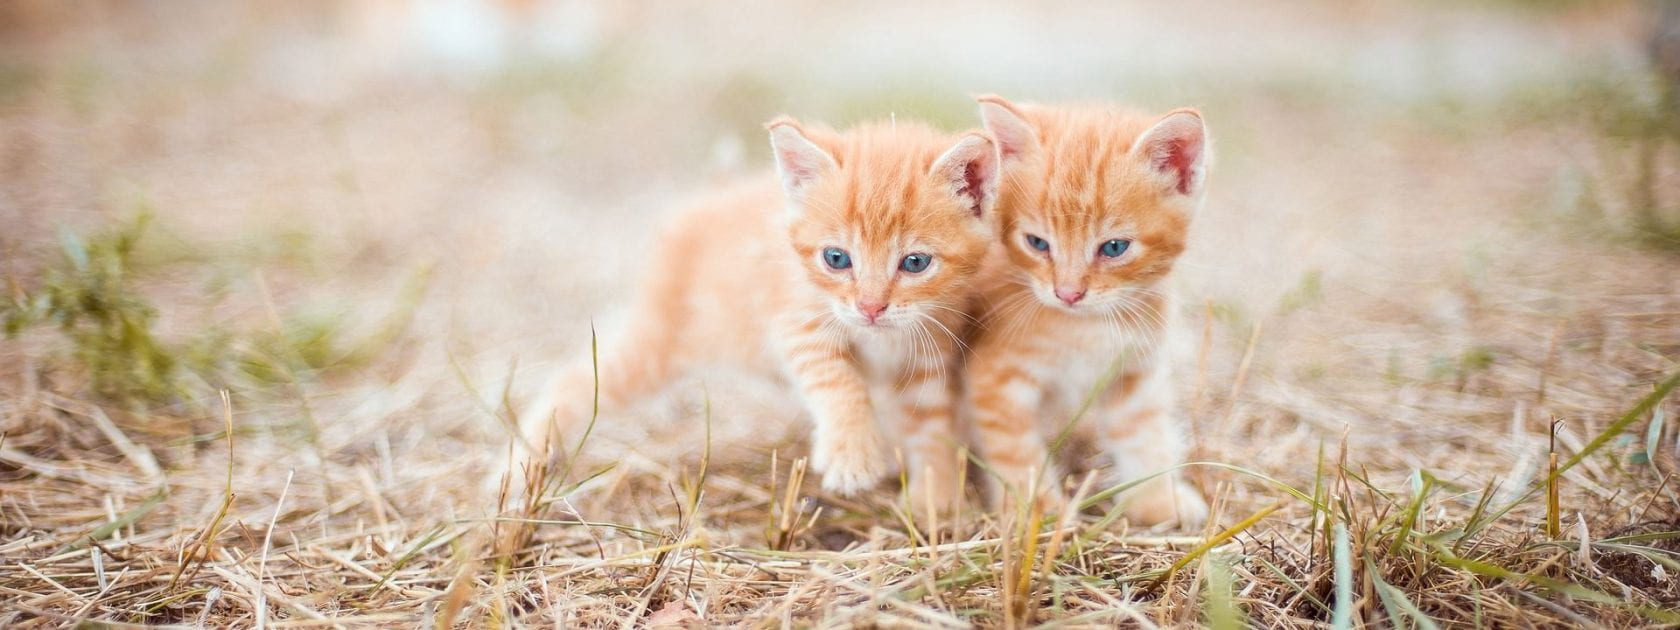 Photo of two orange kittens outside on brownish grass